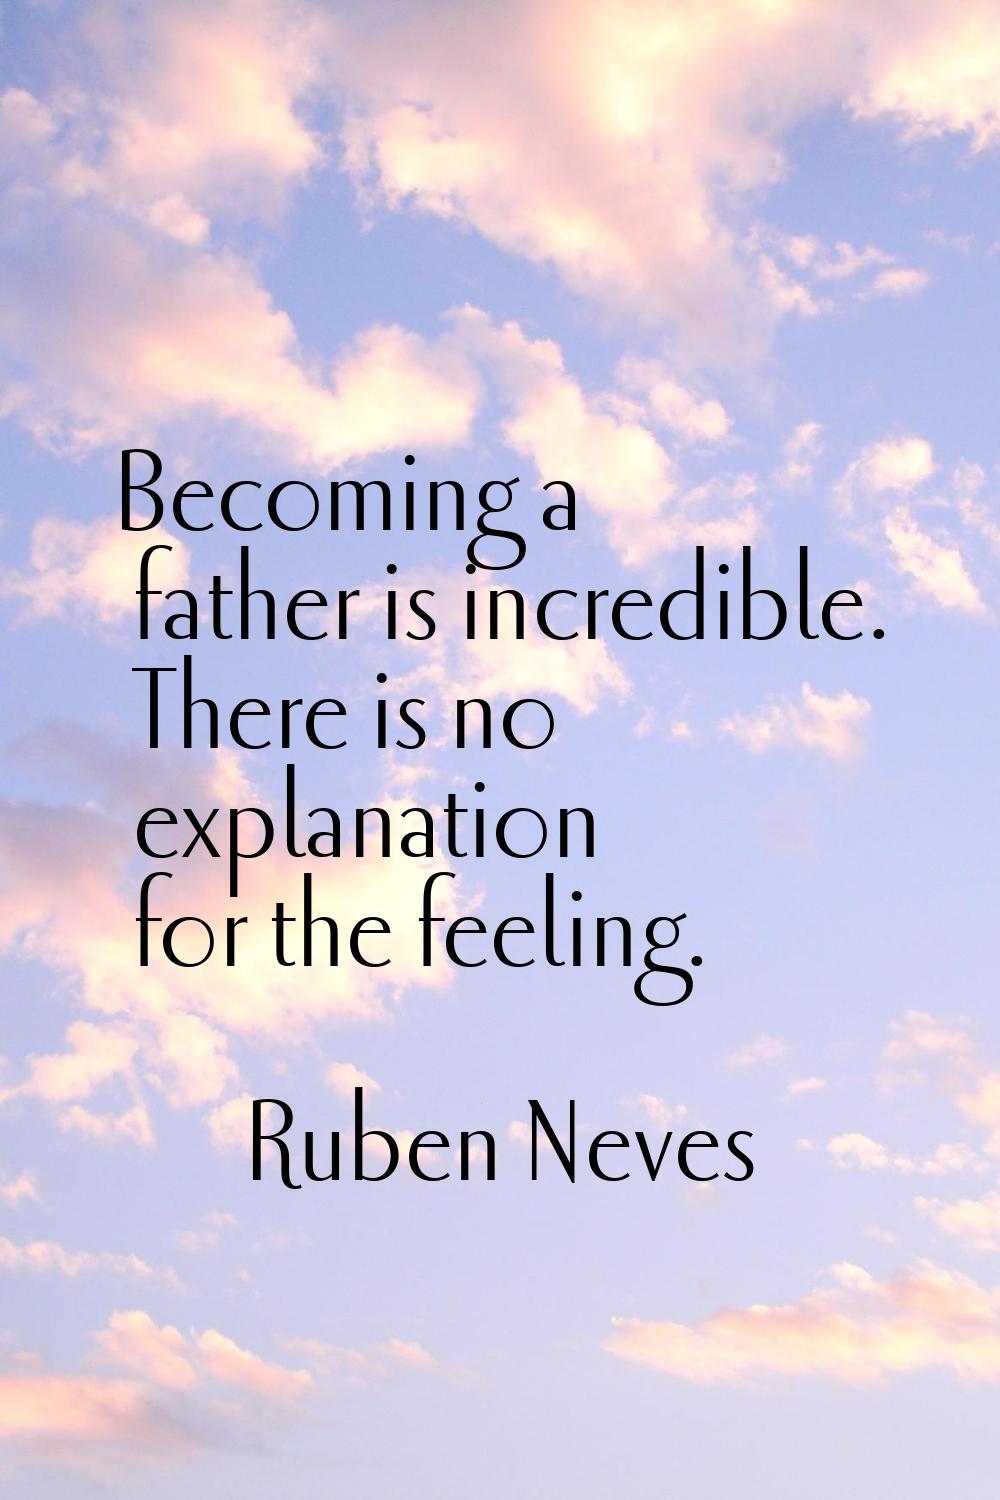 Becoming a father is incredible. There is no explanation for the feeling.